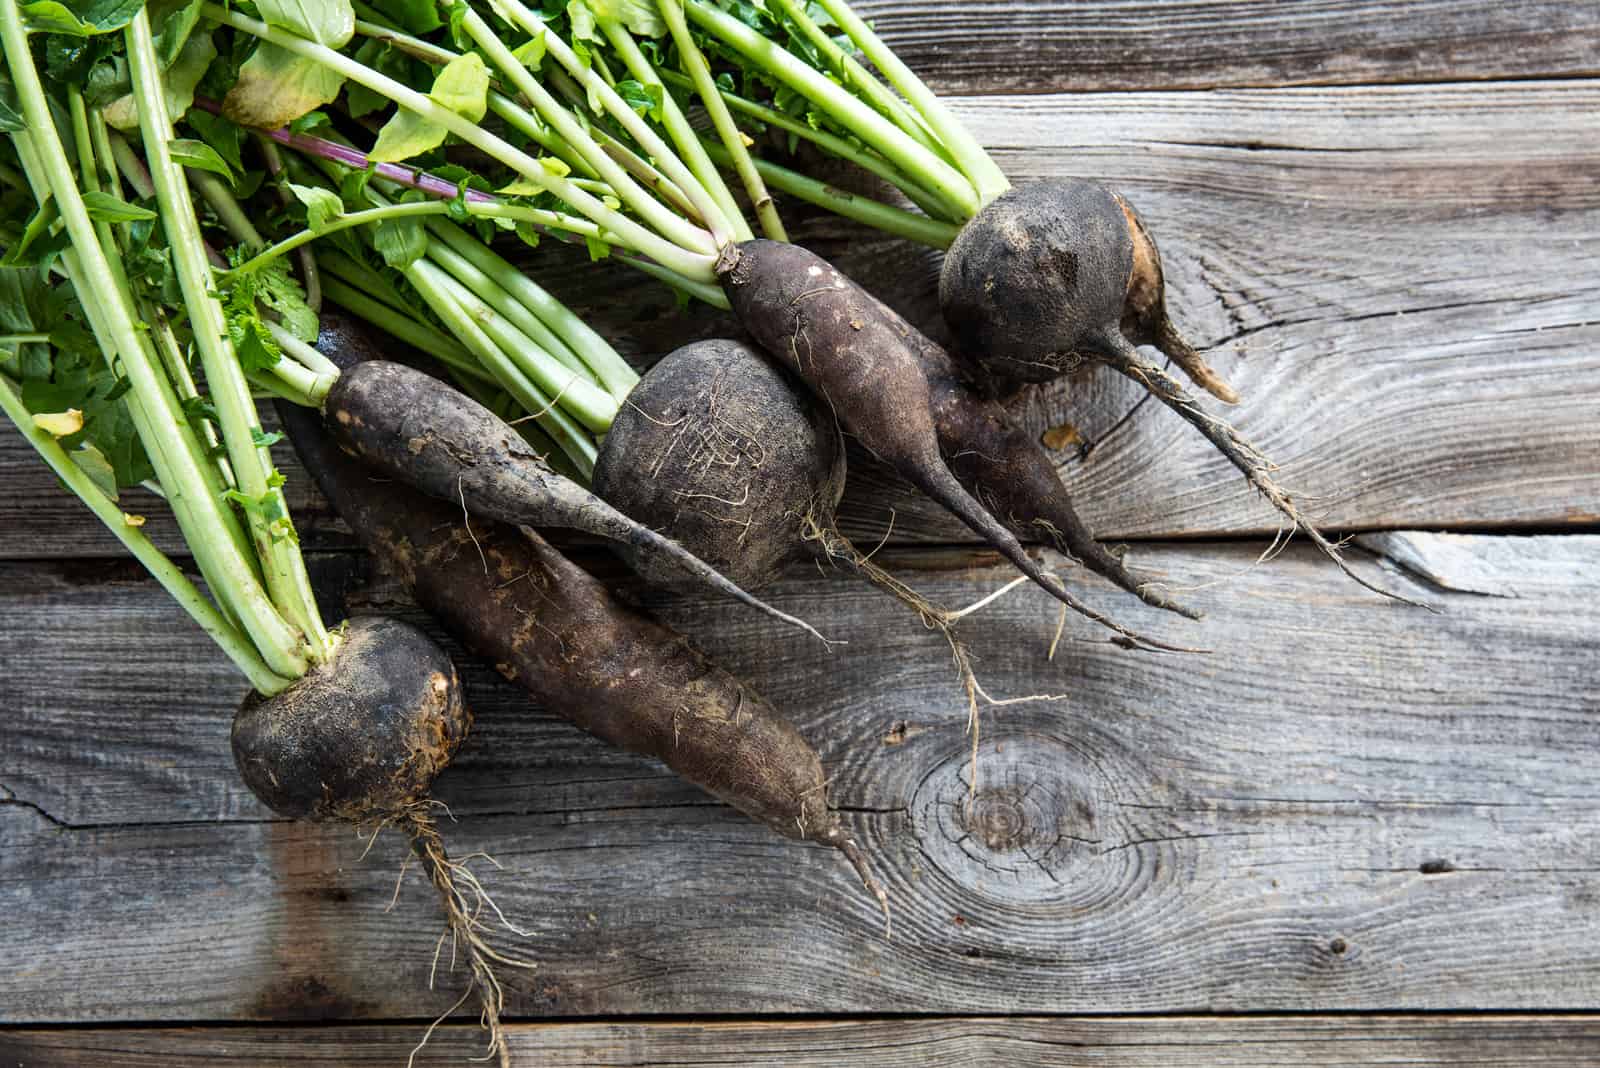 long black radishes with fresh green tops and roots